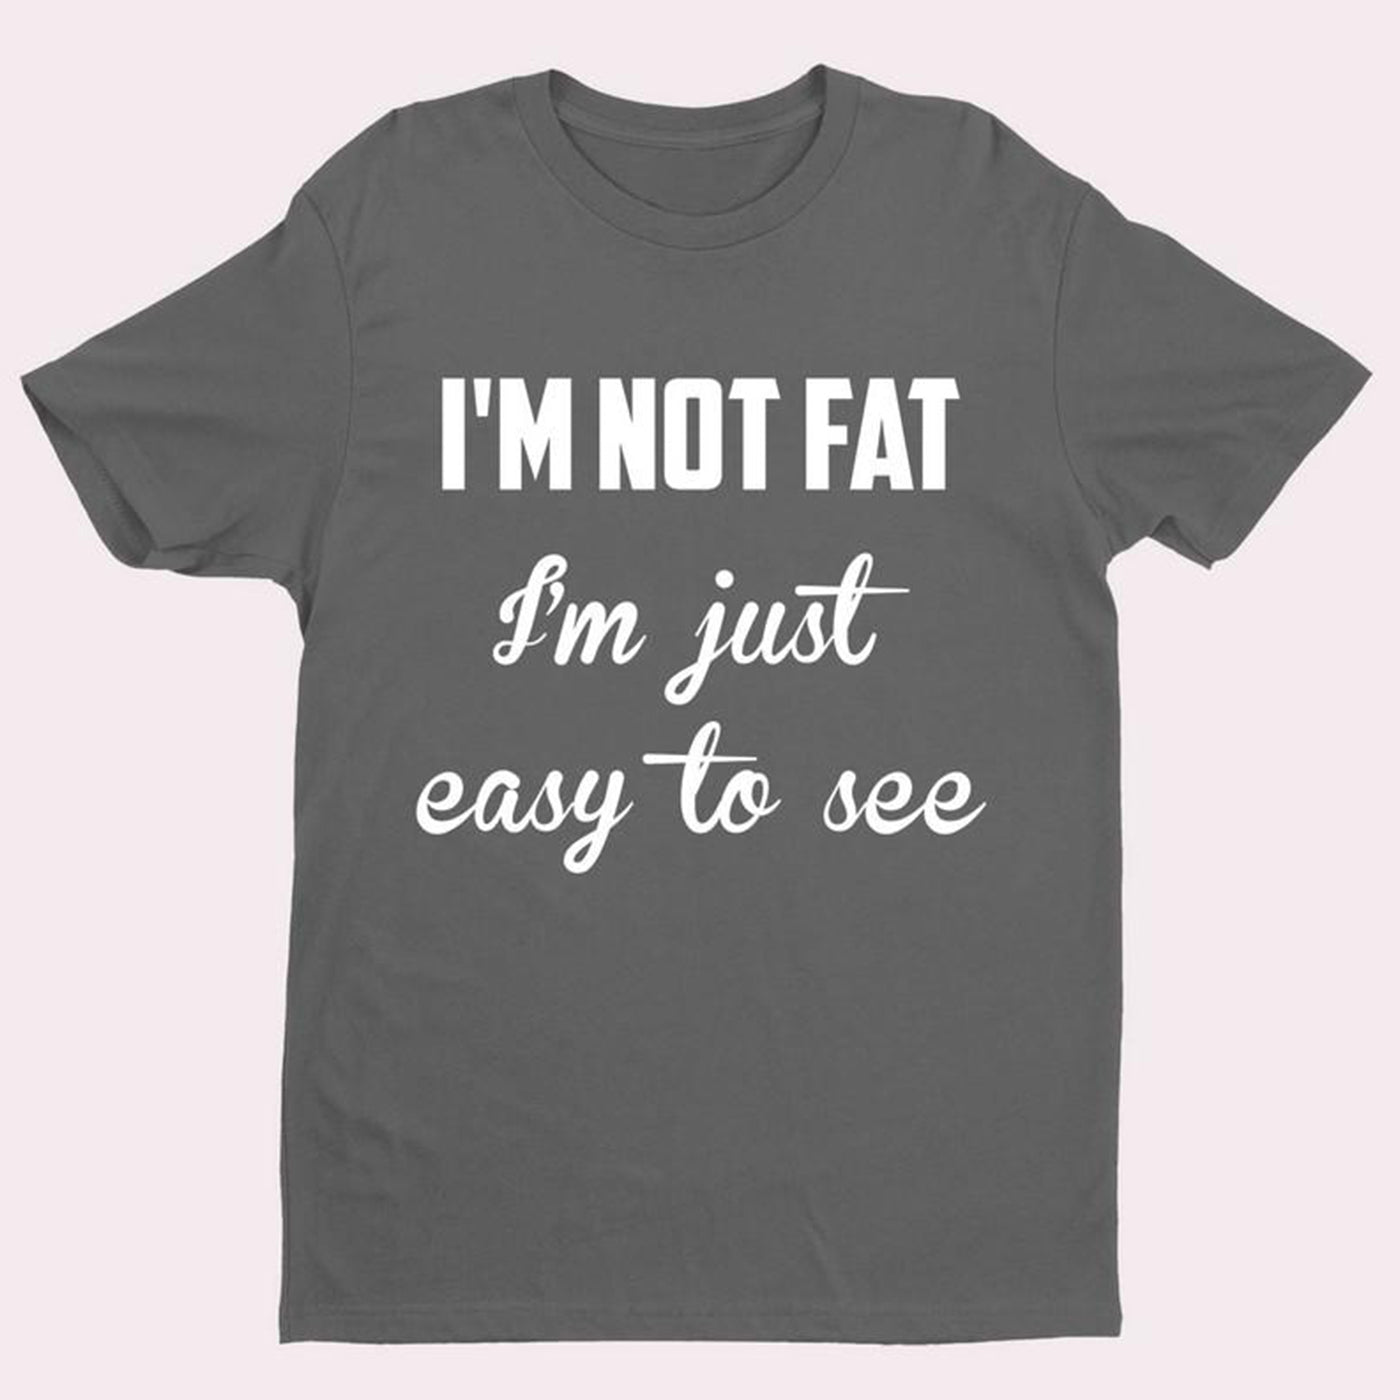 I'm Not Fat I'm Just Easy To See Funny Slogan T Shirt